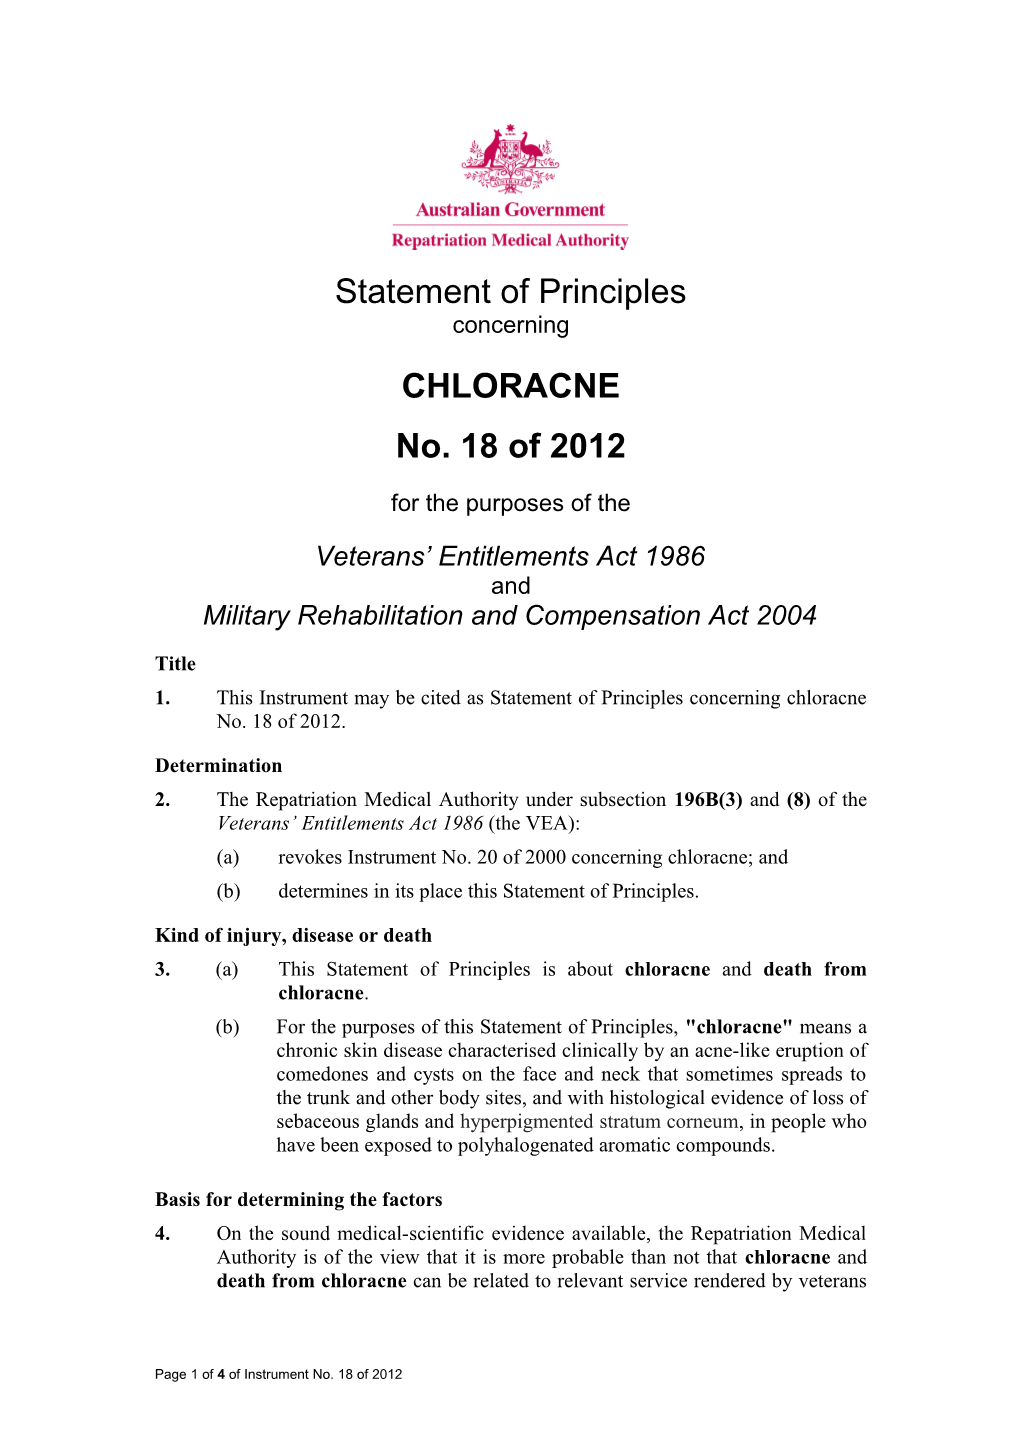 Statement of Principles 18 of 2012 Chloracne Balance of Probabilities